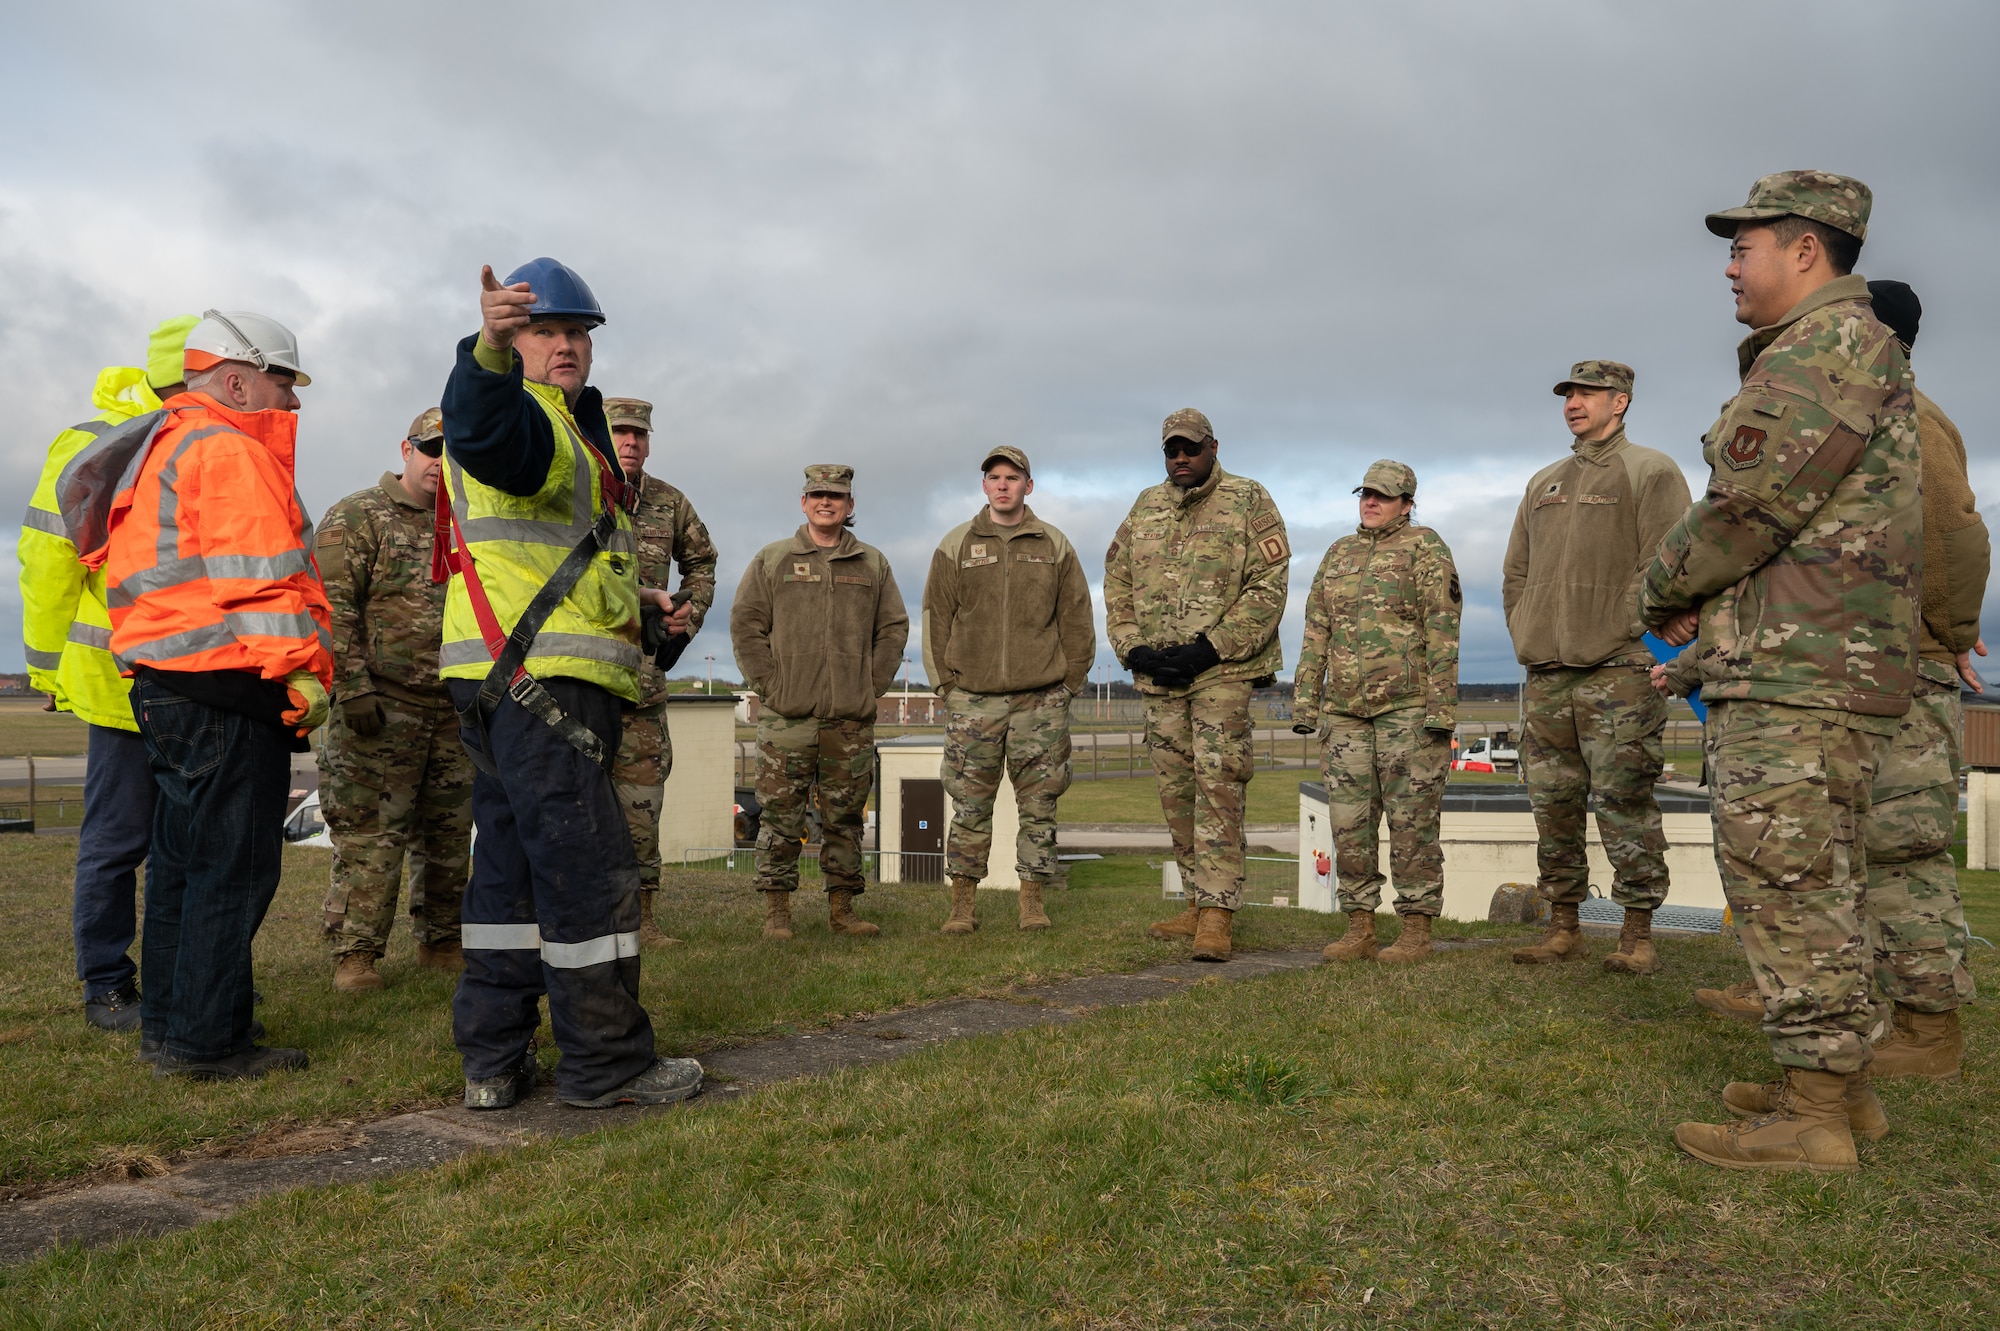 Team Mildenhall personnel listen to a short brief about the process to enter and exit an emptied jet fuel storage tank Feb. 28, 2023, at Royal Air Force Mildenhall, England.